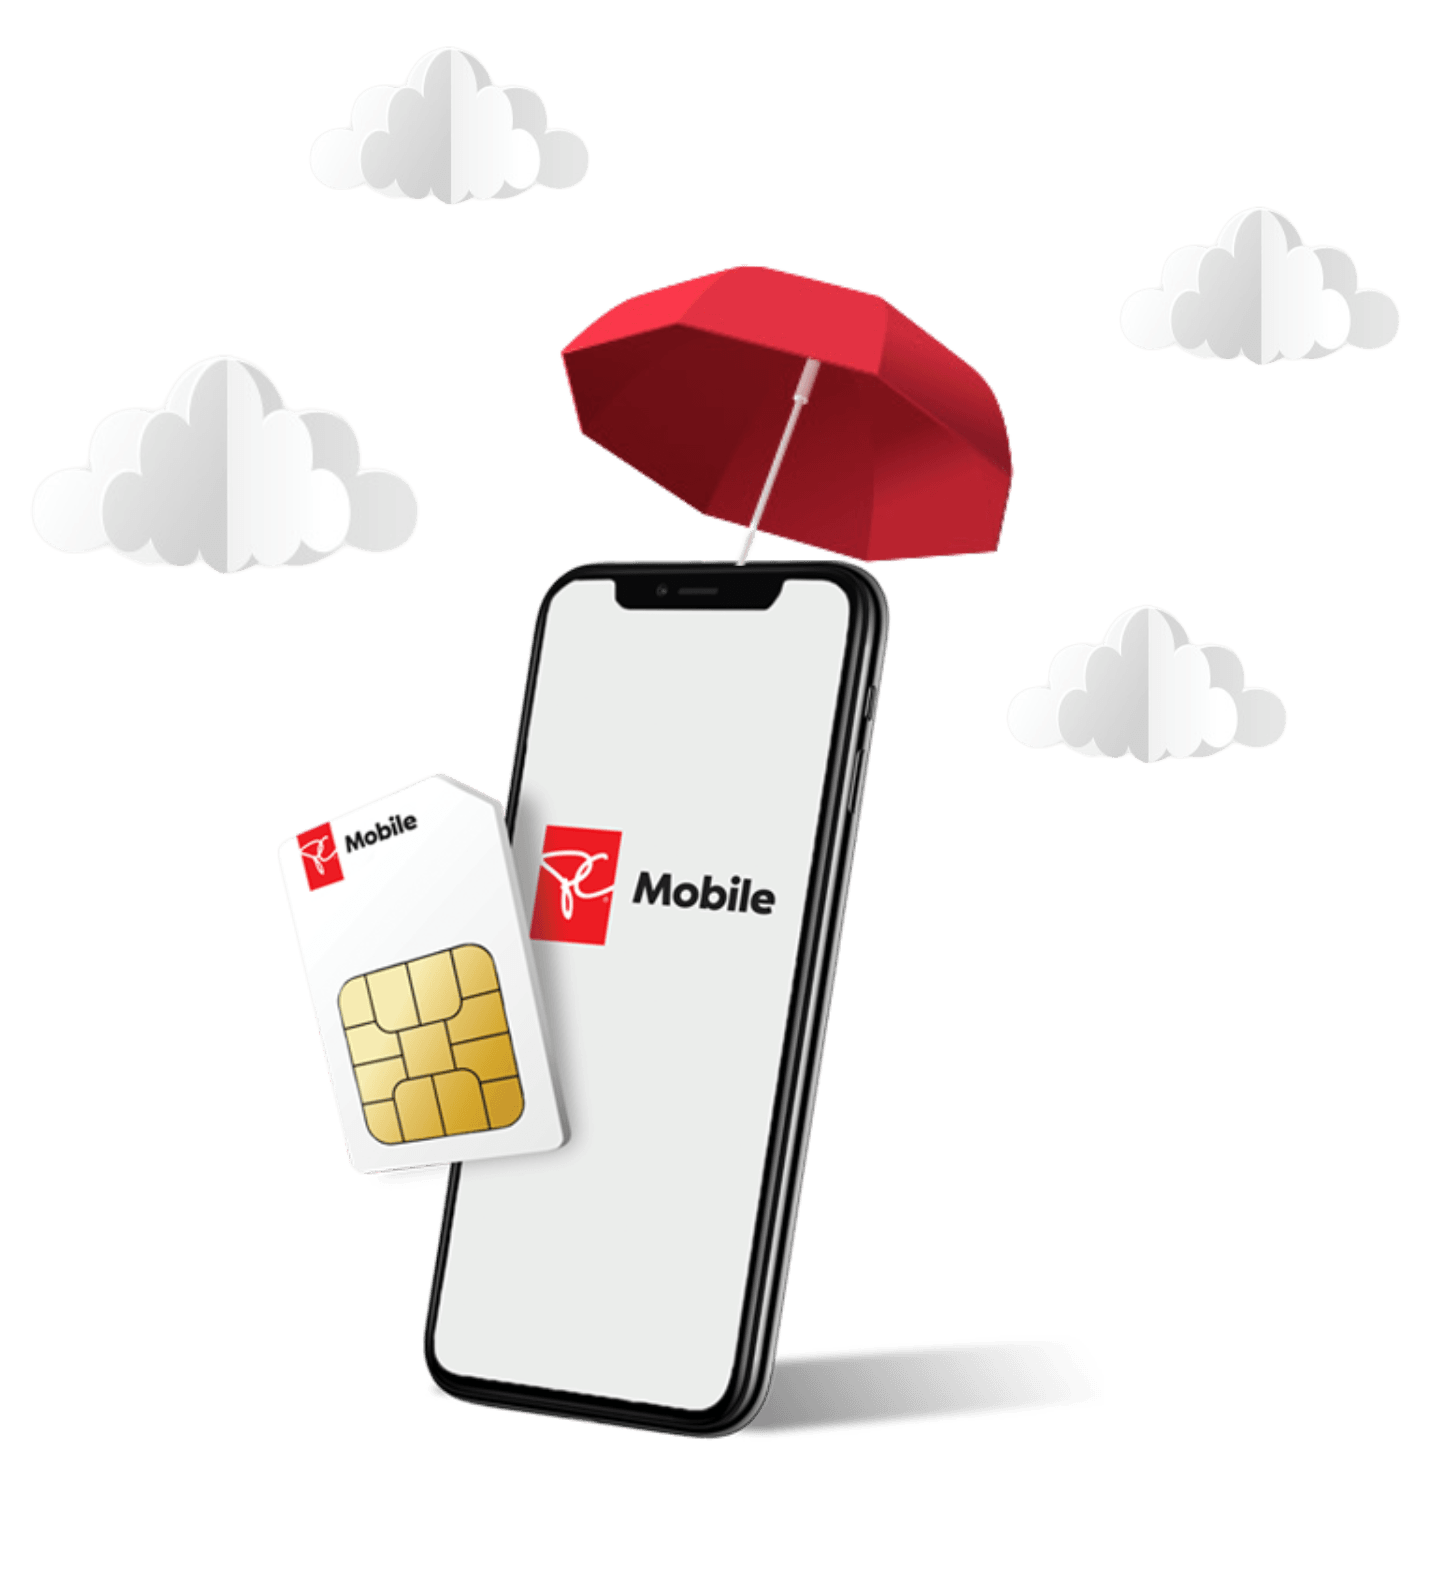 PC Mobile Phone and Sim Card within Umbrella and Clouds